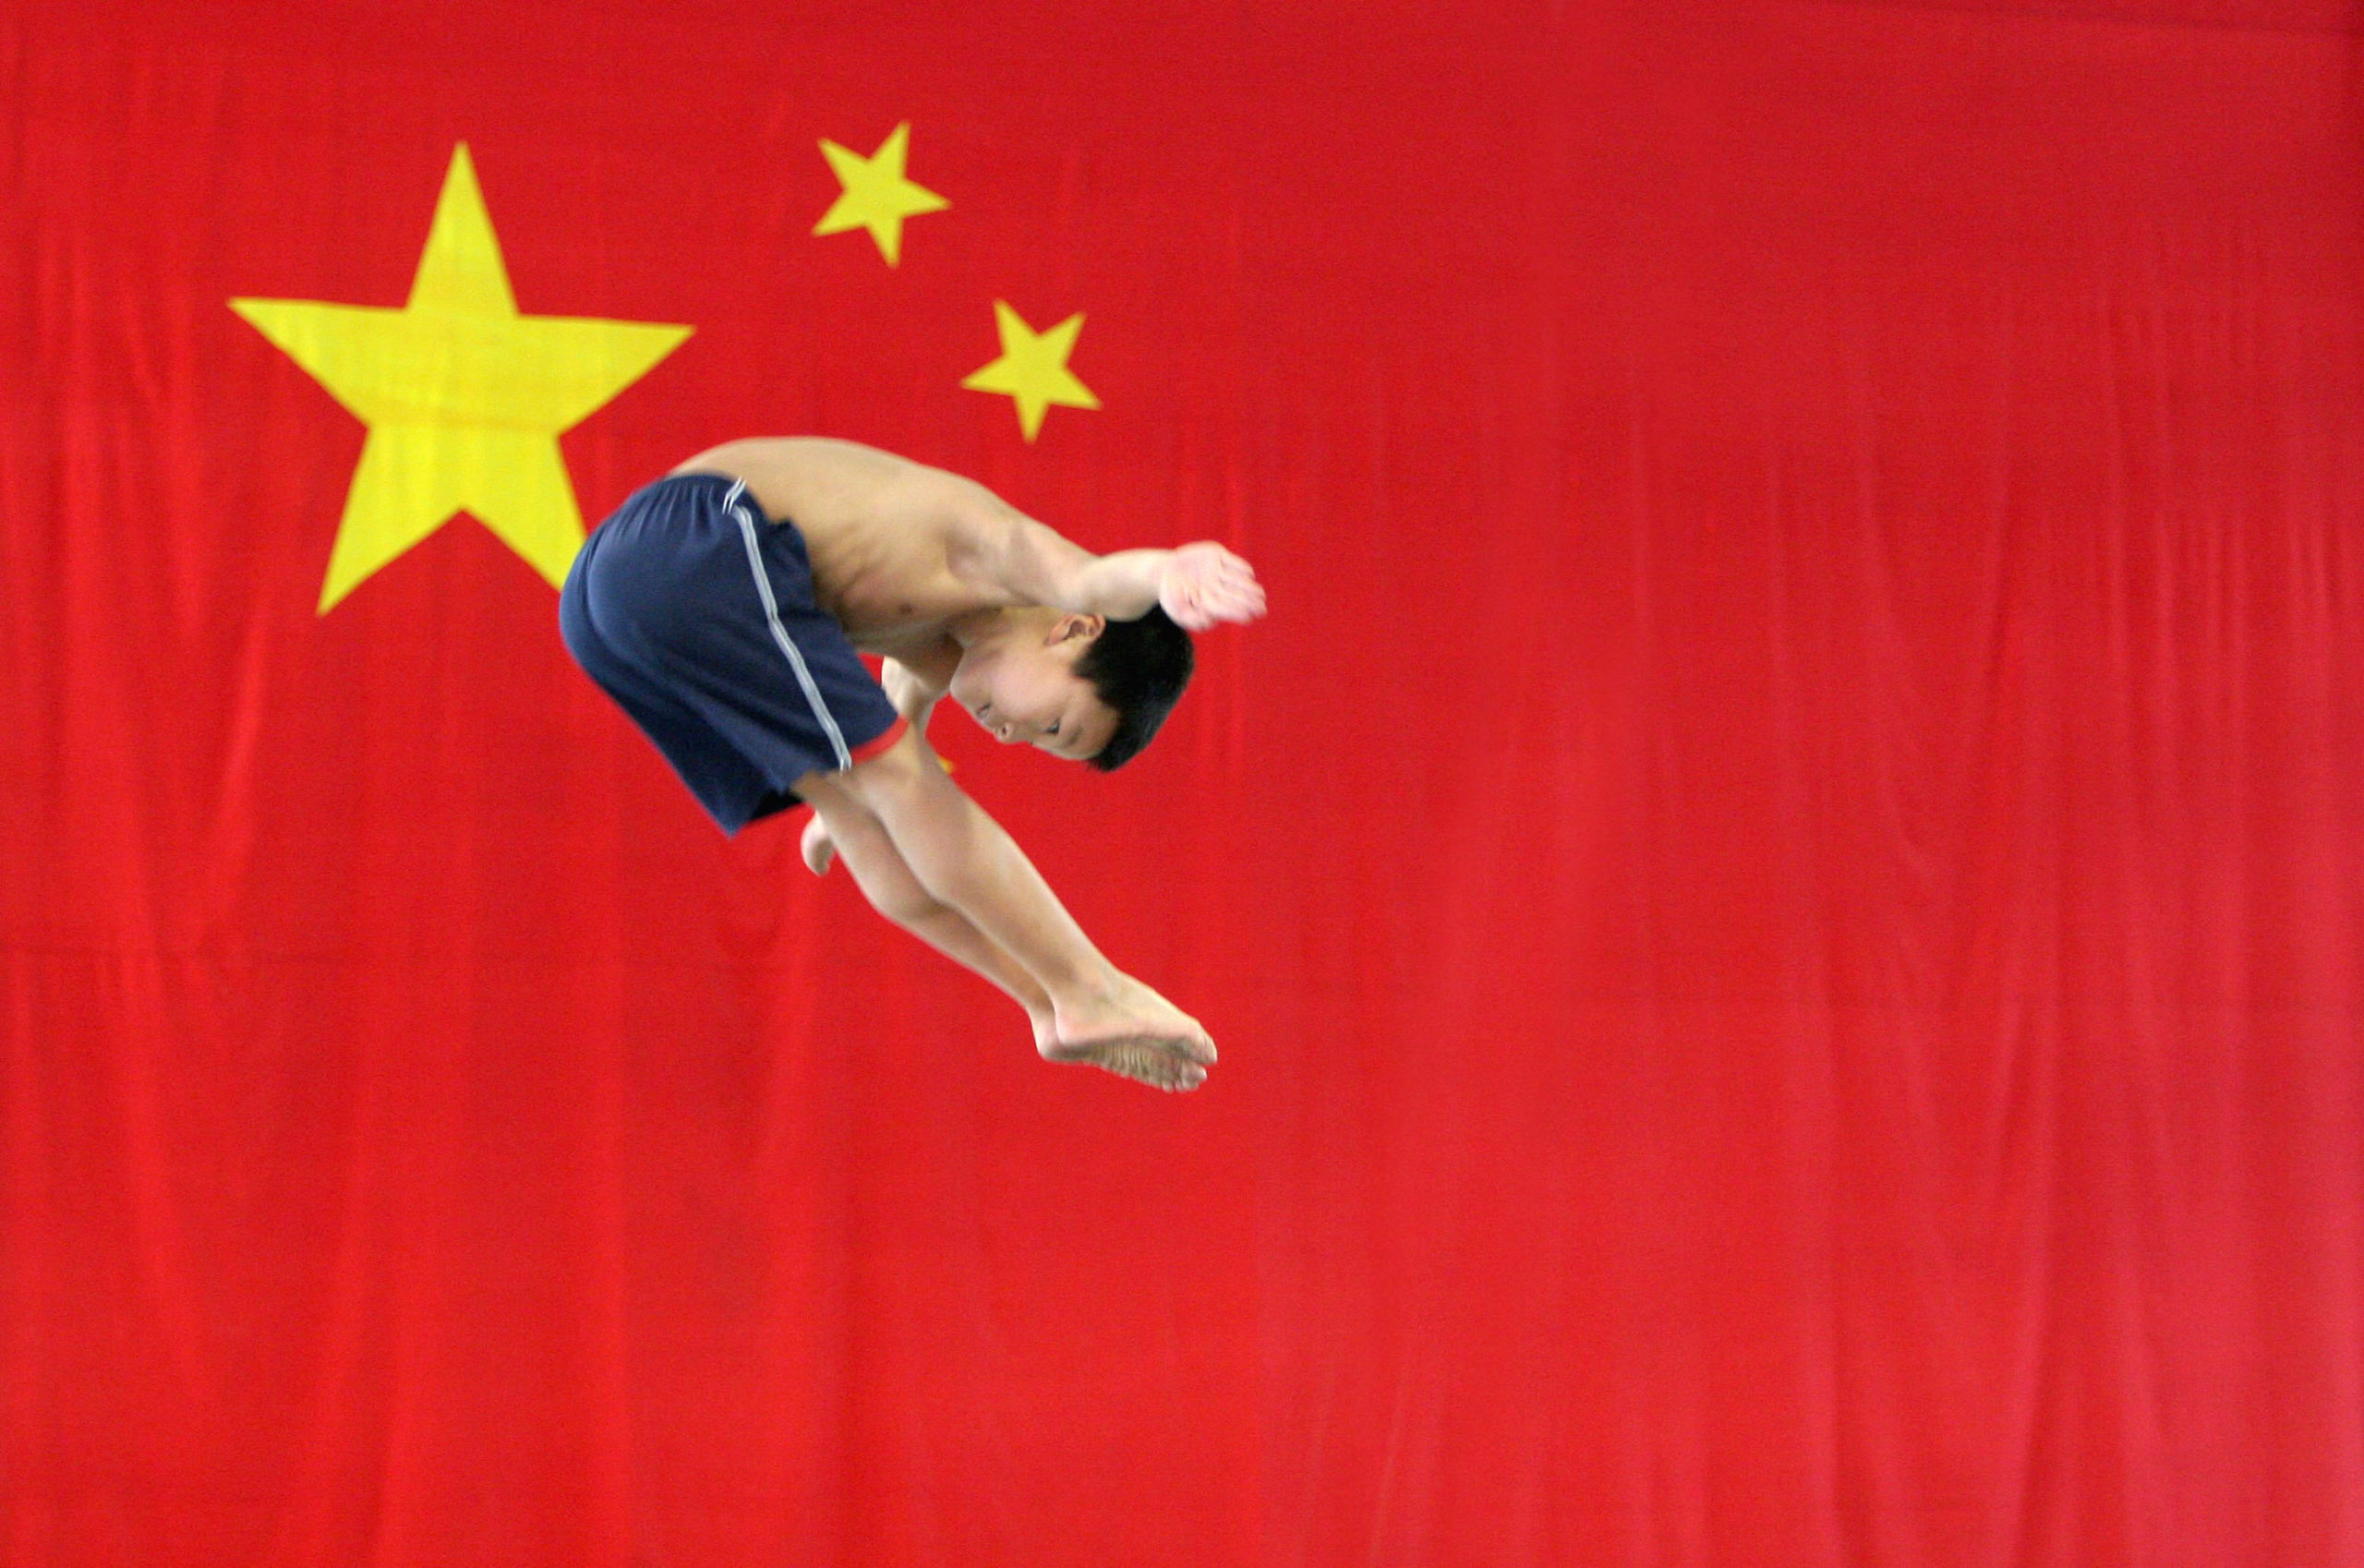 CHENGDU, CHINA - MAY 10: (CHINA OUT) A young boy practises diving movements as he jumps on a trampoline in front of a national flag at a diving school on May 10, 2005 in Chengdu of Sichuan Province, China. There are approximately 3,000 sport schools in China, recruiting thousands of very young children and sending the elites for Olympic training. China has consistently risen in the Olympic medal table, coming second in Athens 2004 and China will host the 2008 Olympic Games. This success has encouraged more parents to send their children to government-funded sport schools, though the training is extremely hard. (Photo by China Photos/Getty Images)